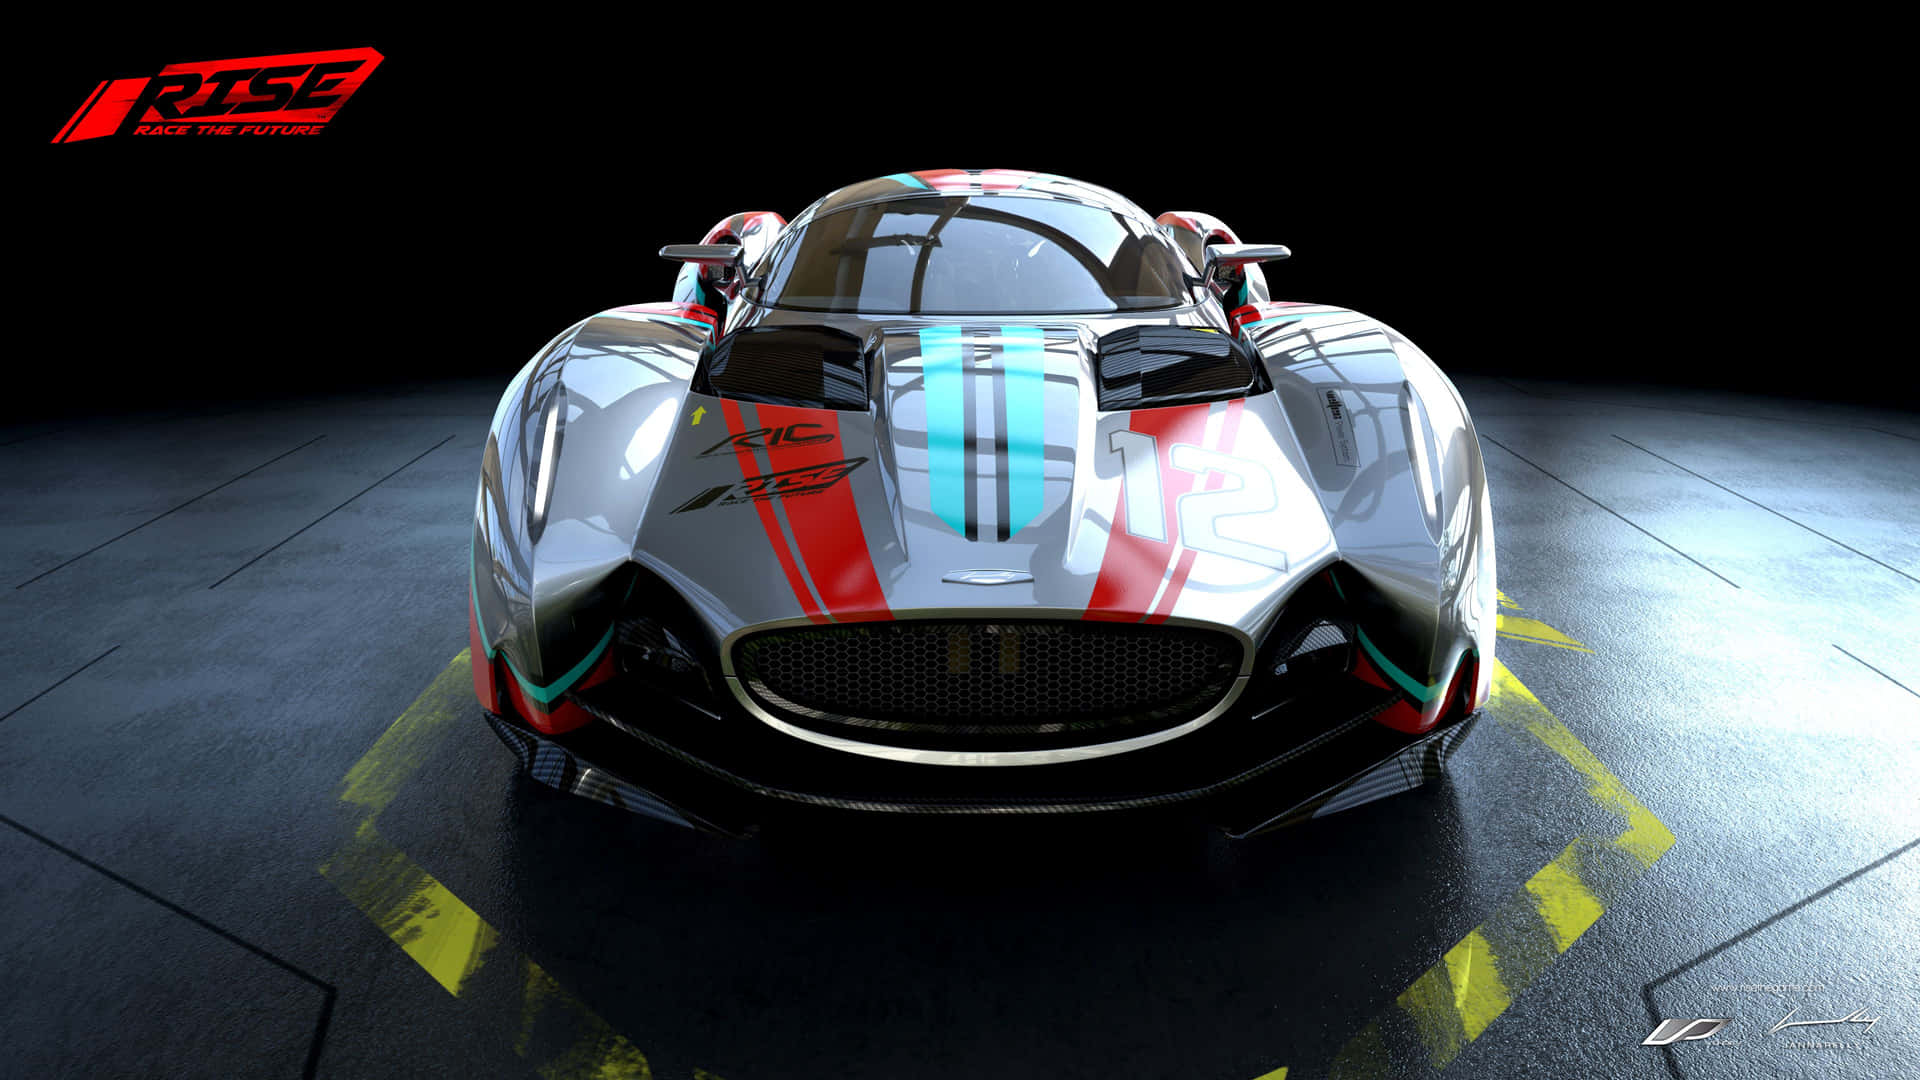 Captivating car race in an action-packed virtual world Wallpaper